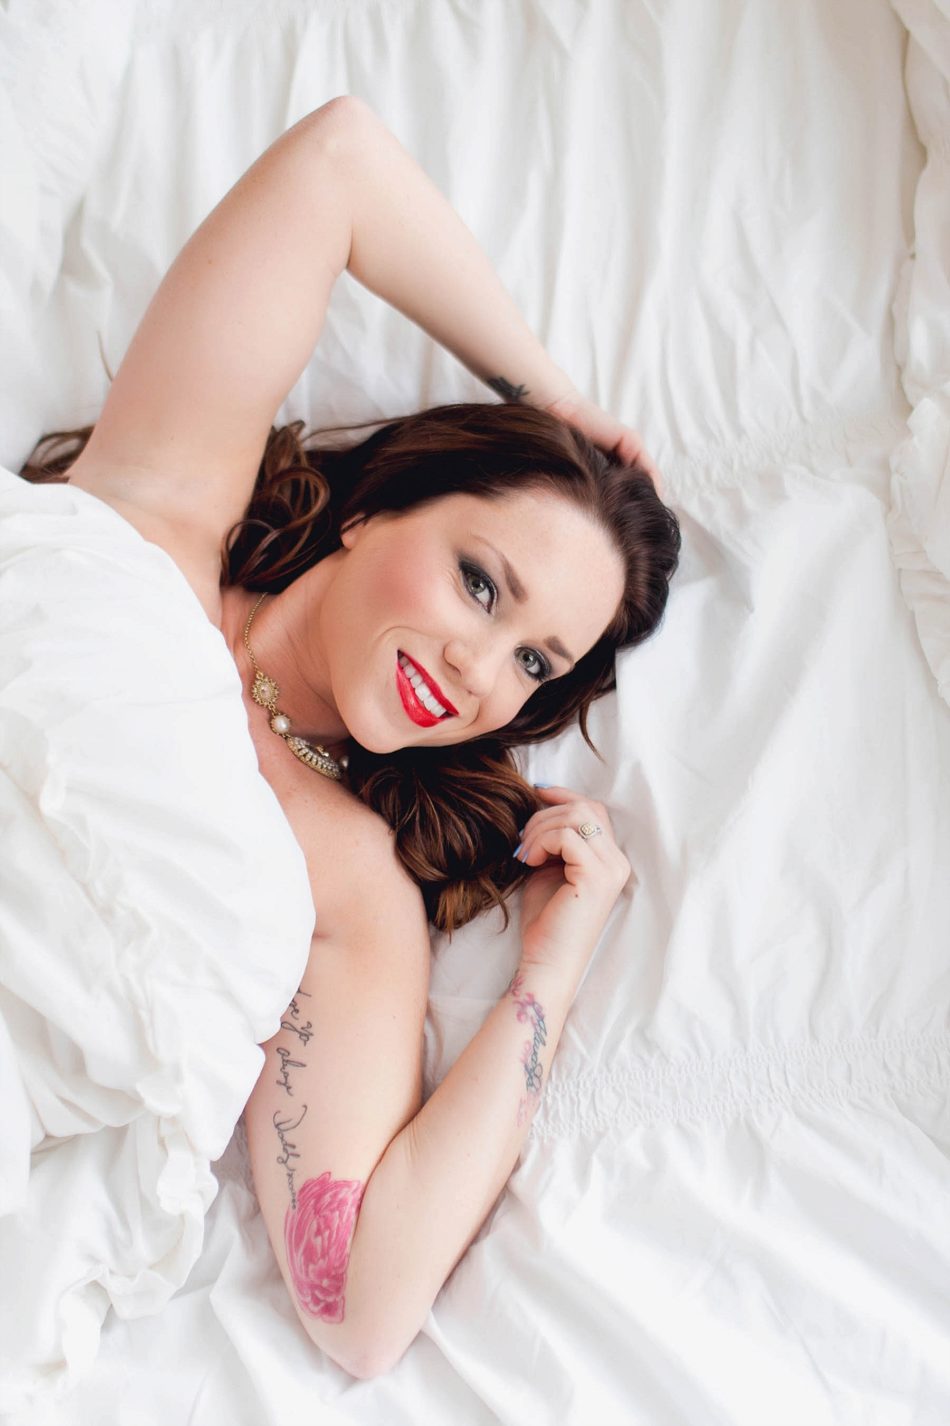 Ms L reenacts famous Marilyn Monroe pose in bed, Boudoir Photography, Charleston, SC Kate Timbers Photography. http://katetimbers.com #katetimbersphotography // Charleston Photography // Inspiration